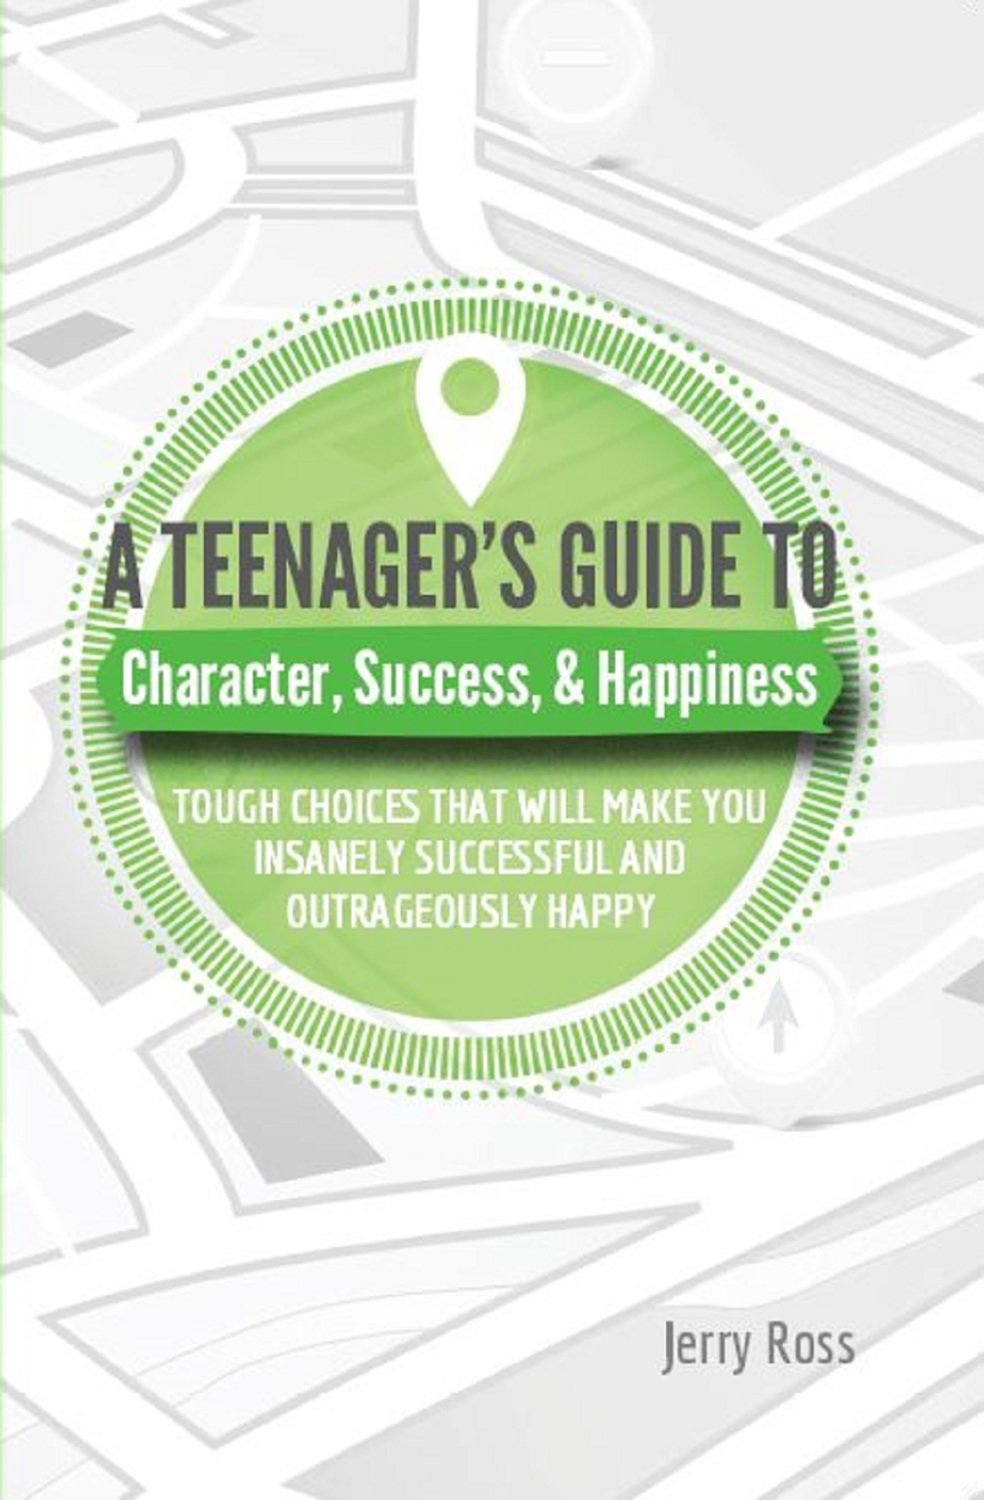 A Teenager's Guide to... Character, Success, & Happiness